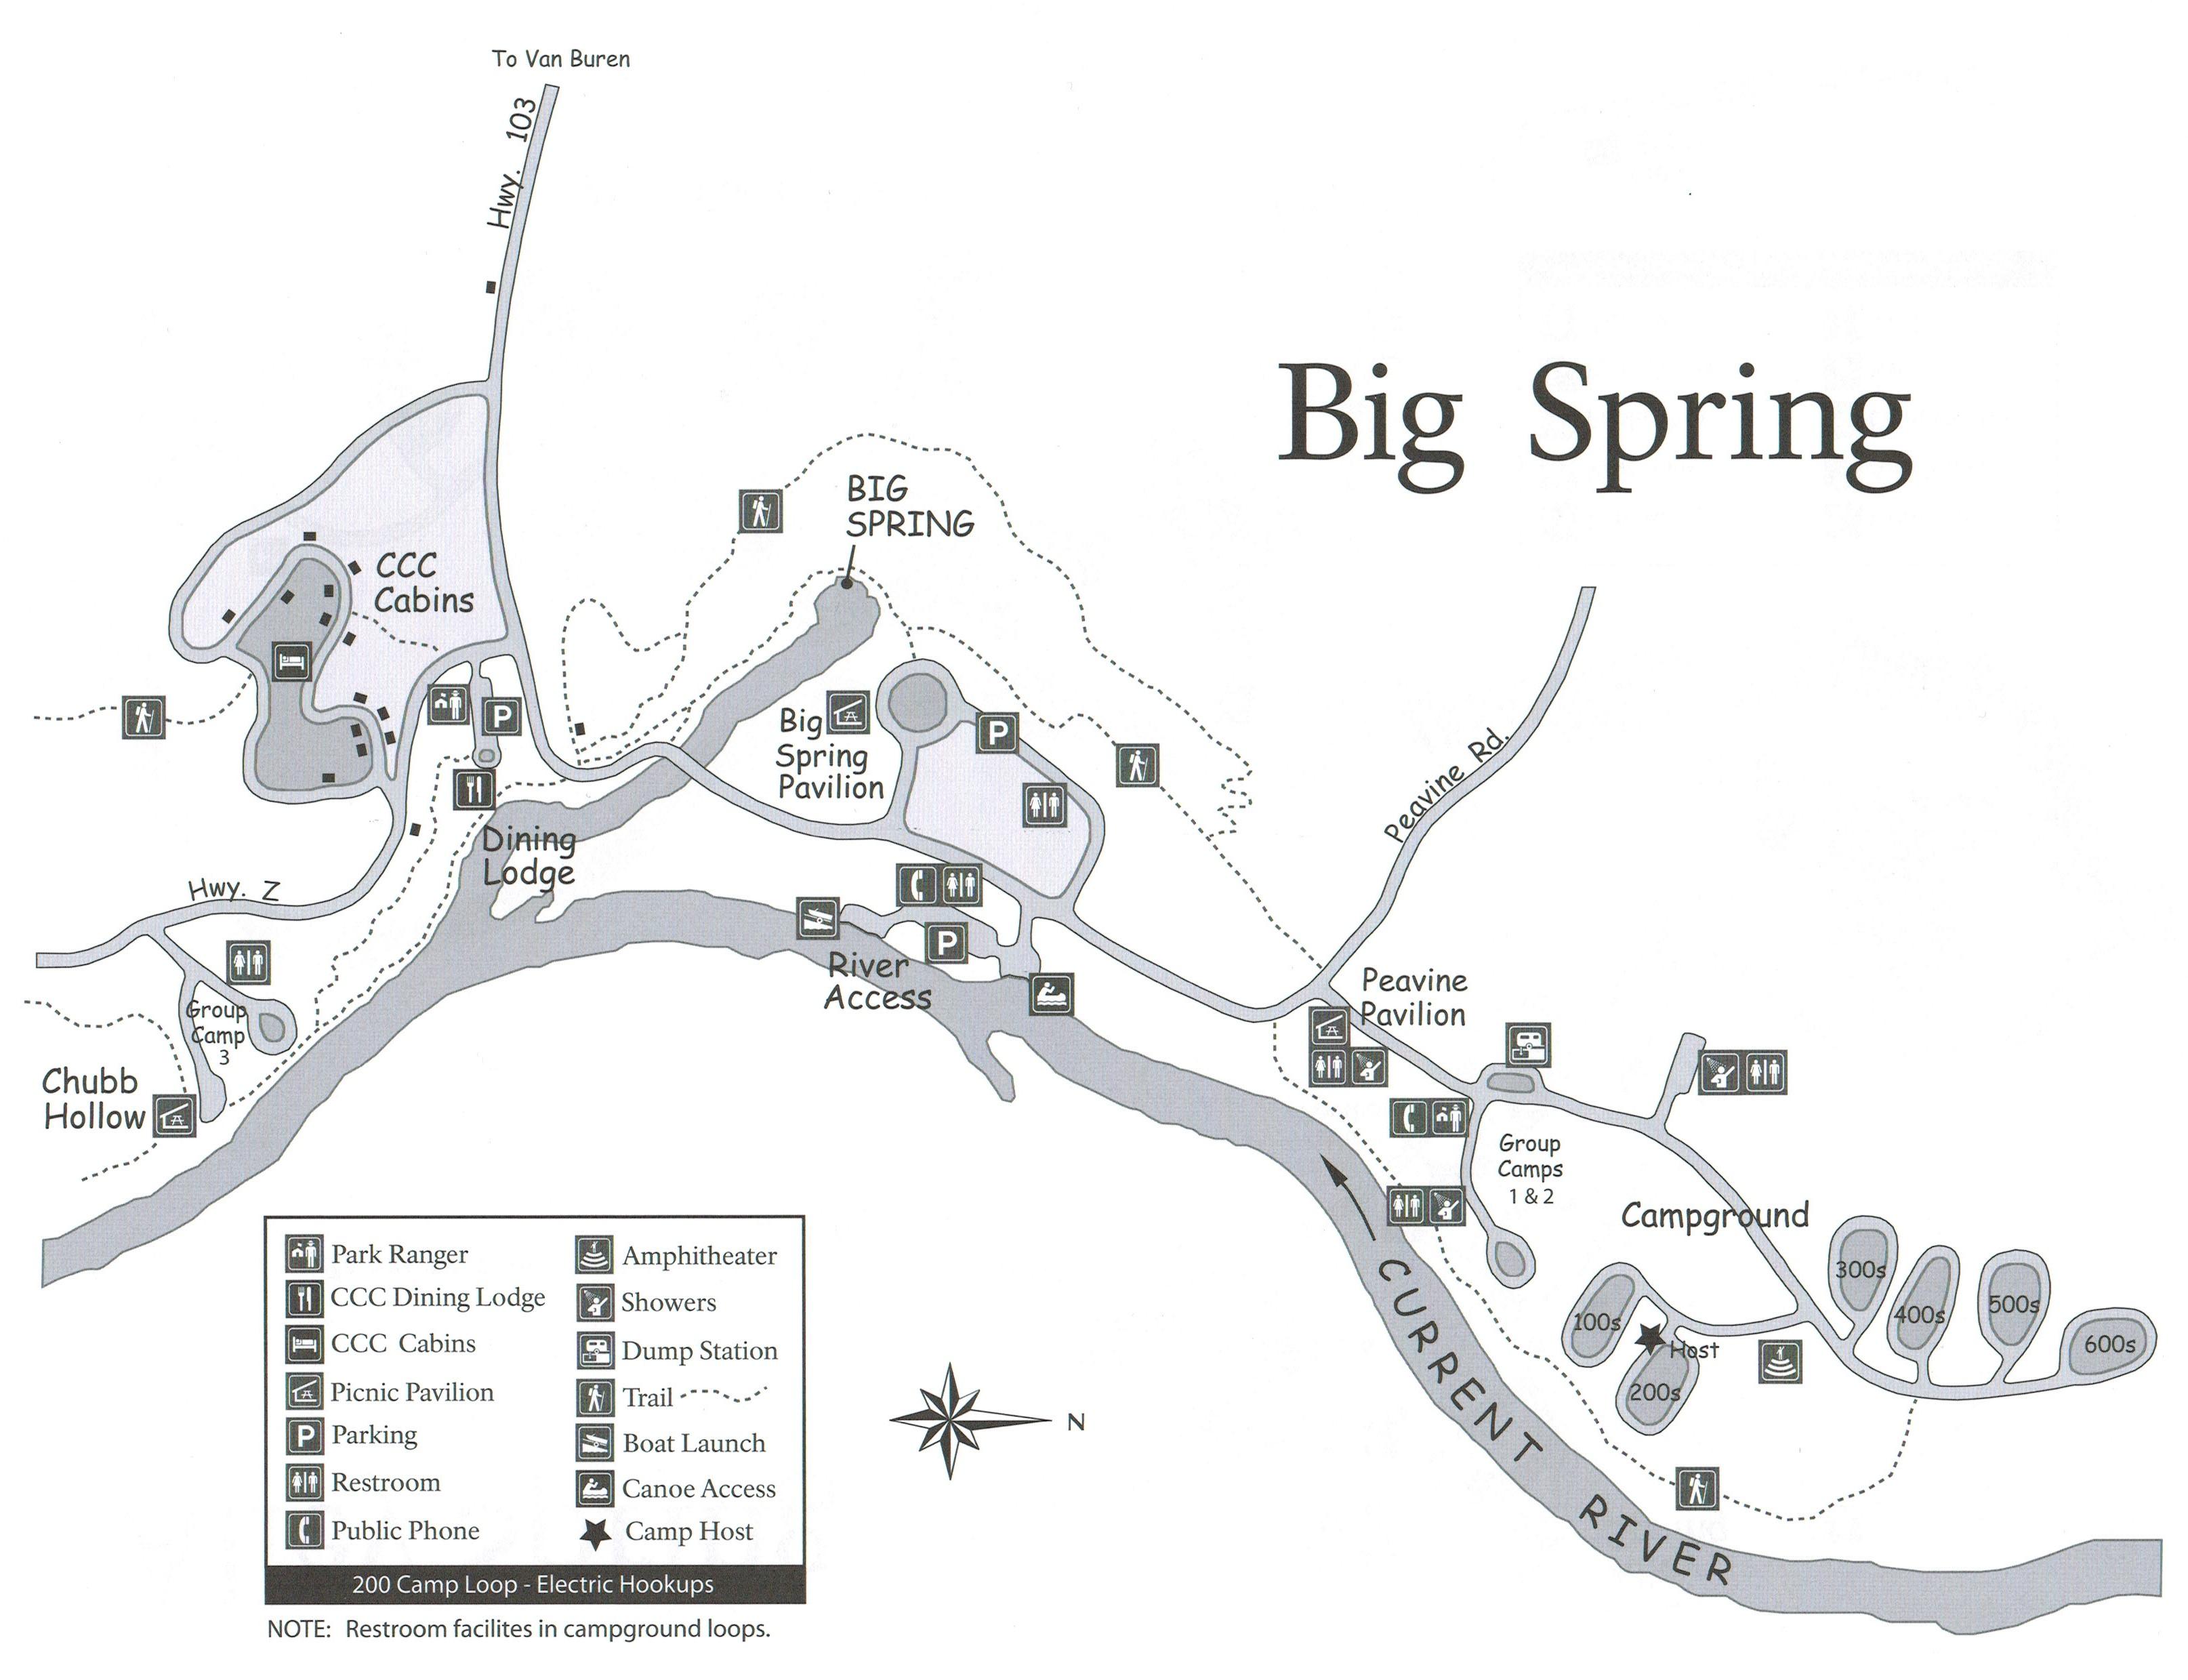 a printed map showing campsites, roads, river, restrooms at Big Spring Campground